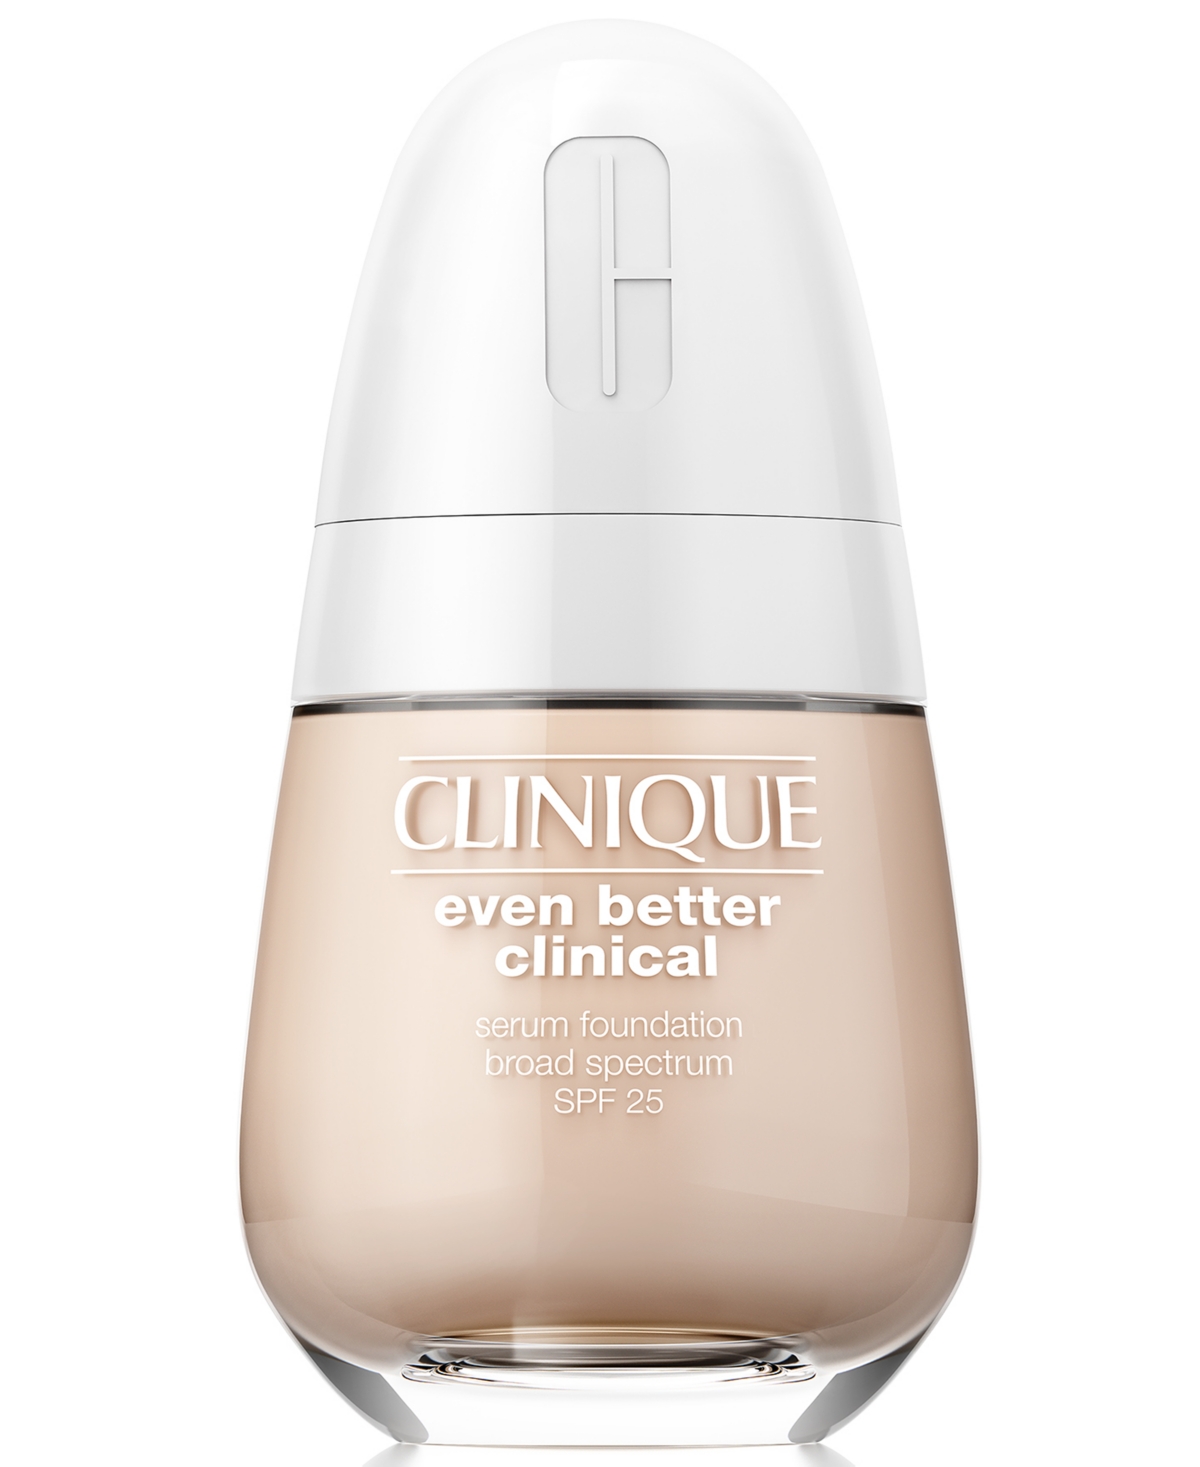 Clinique Even Better Clinical Serum Foundation Broad Spectrum Spf 25, 1-oz. In Wn  Flax